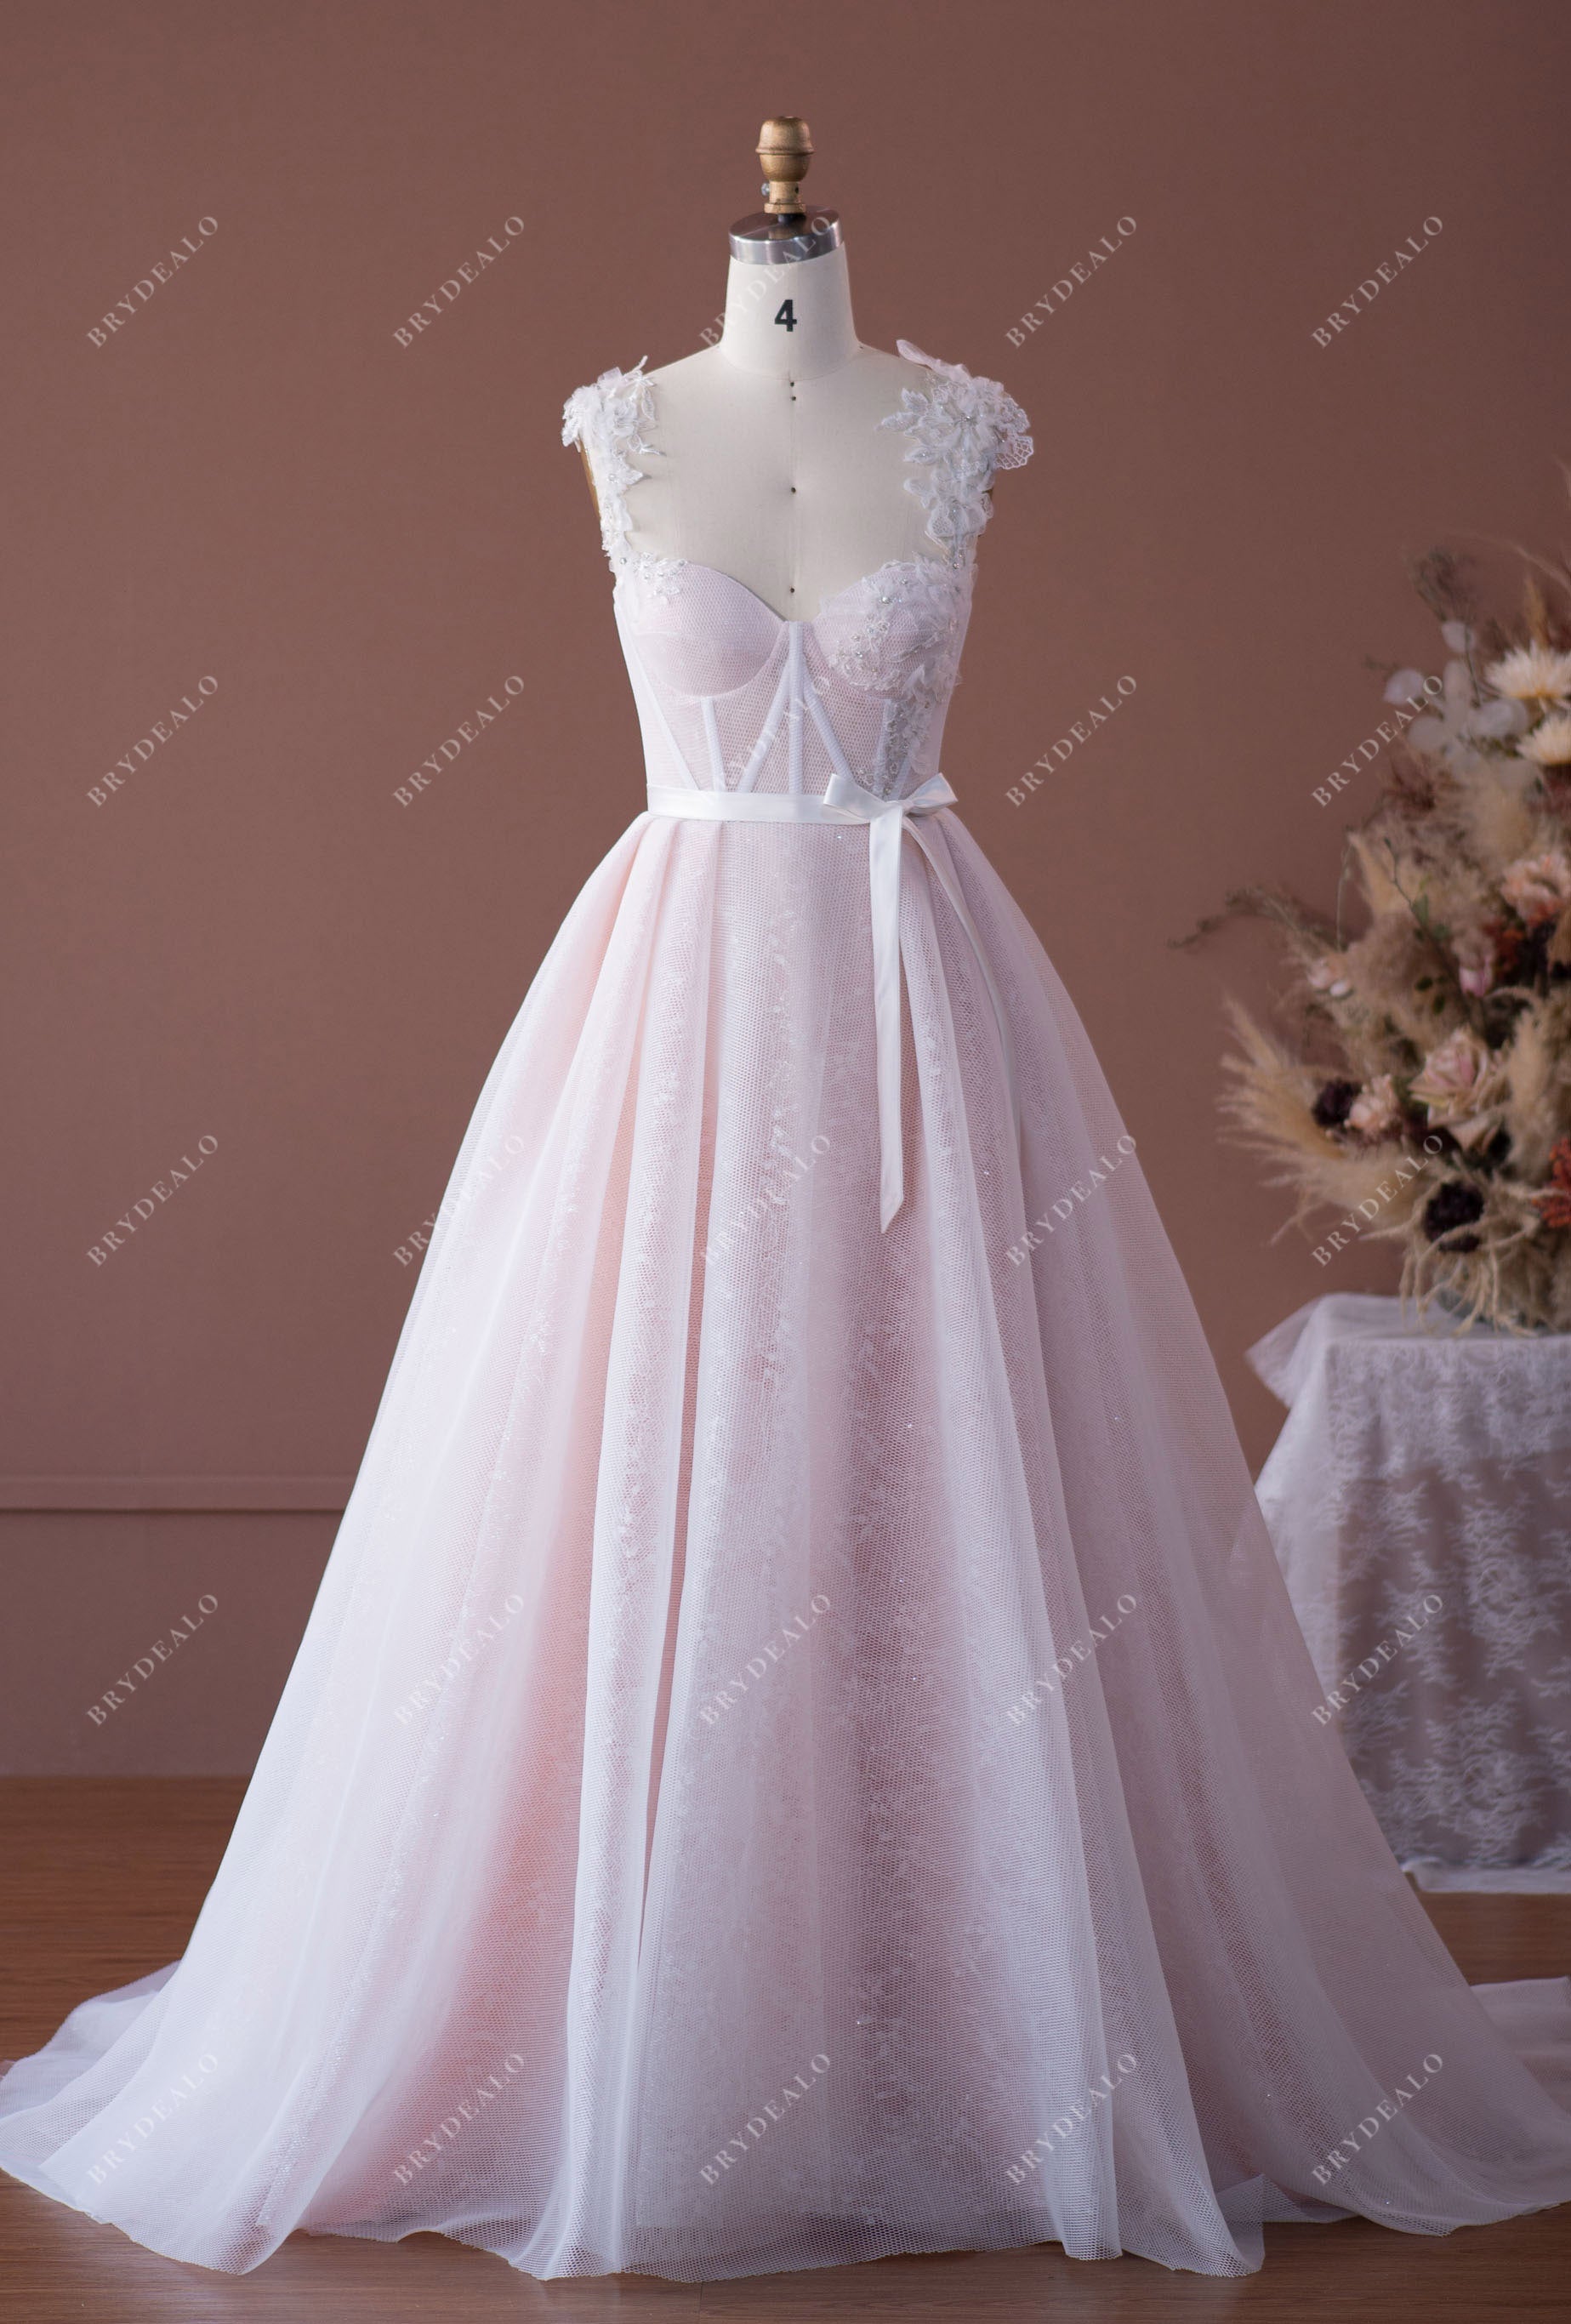 Sweetheart Neck Lace Straps Pinkish Corset Bridal Gown Online